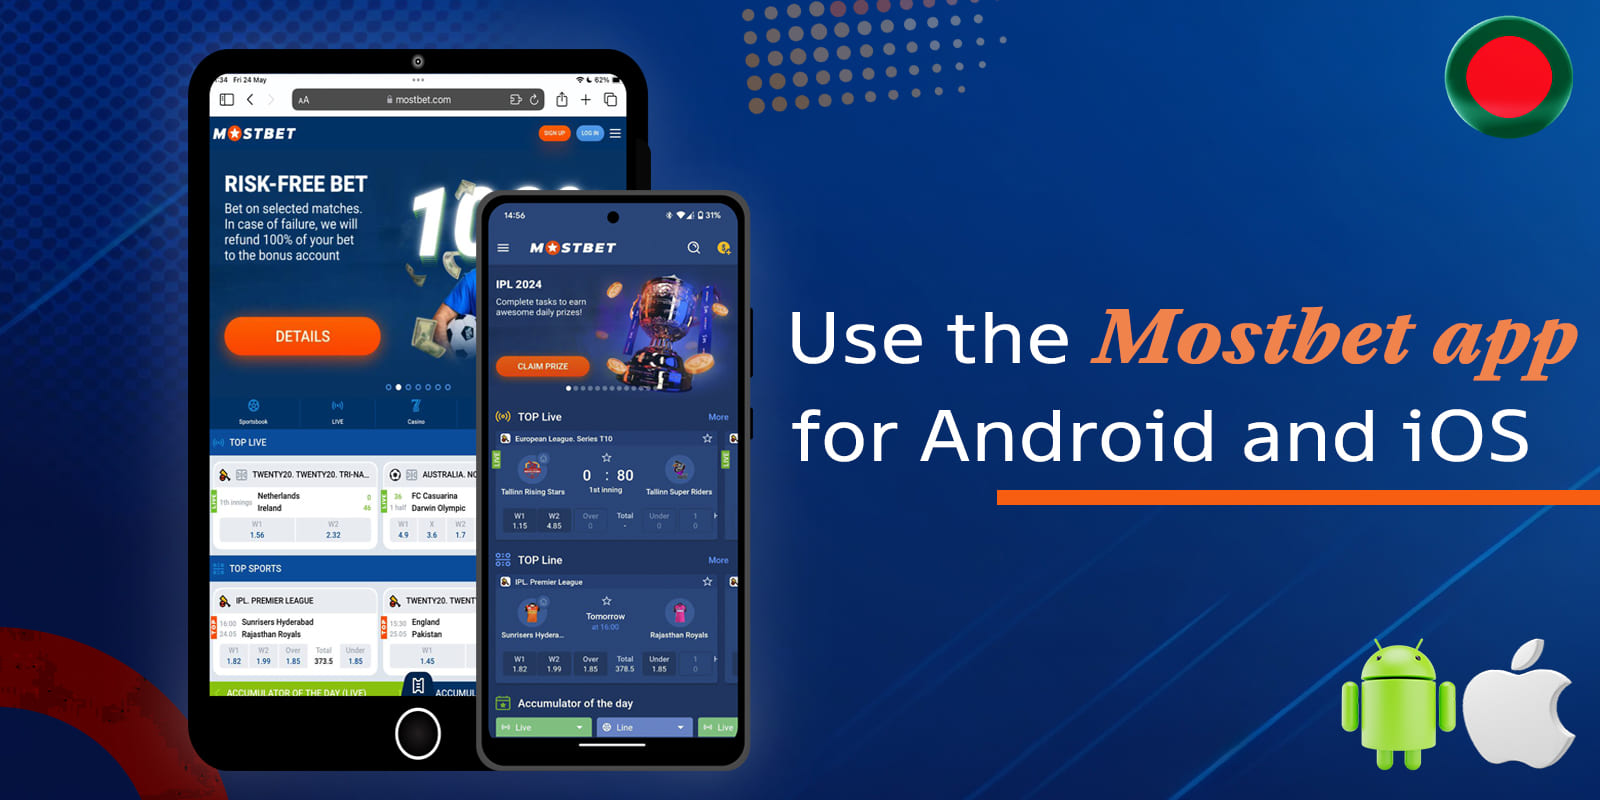 The Mostbet app for Android or iOS